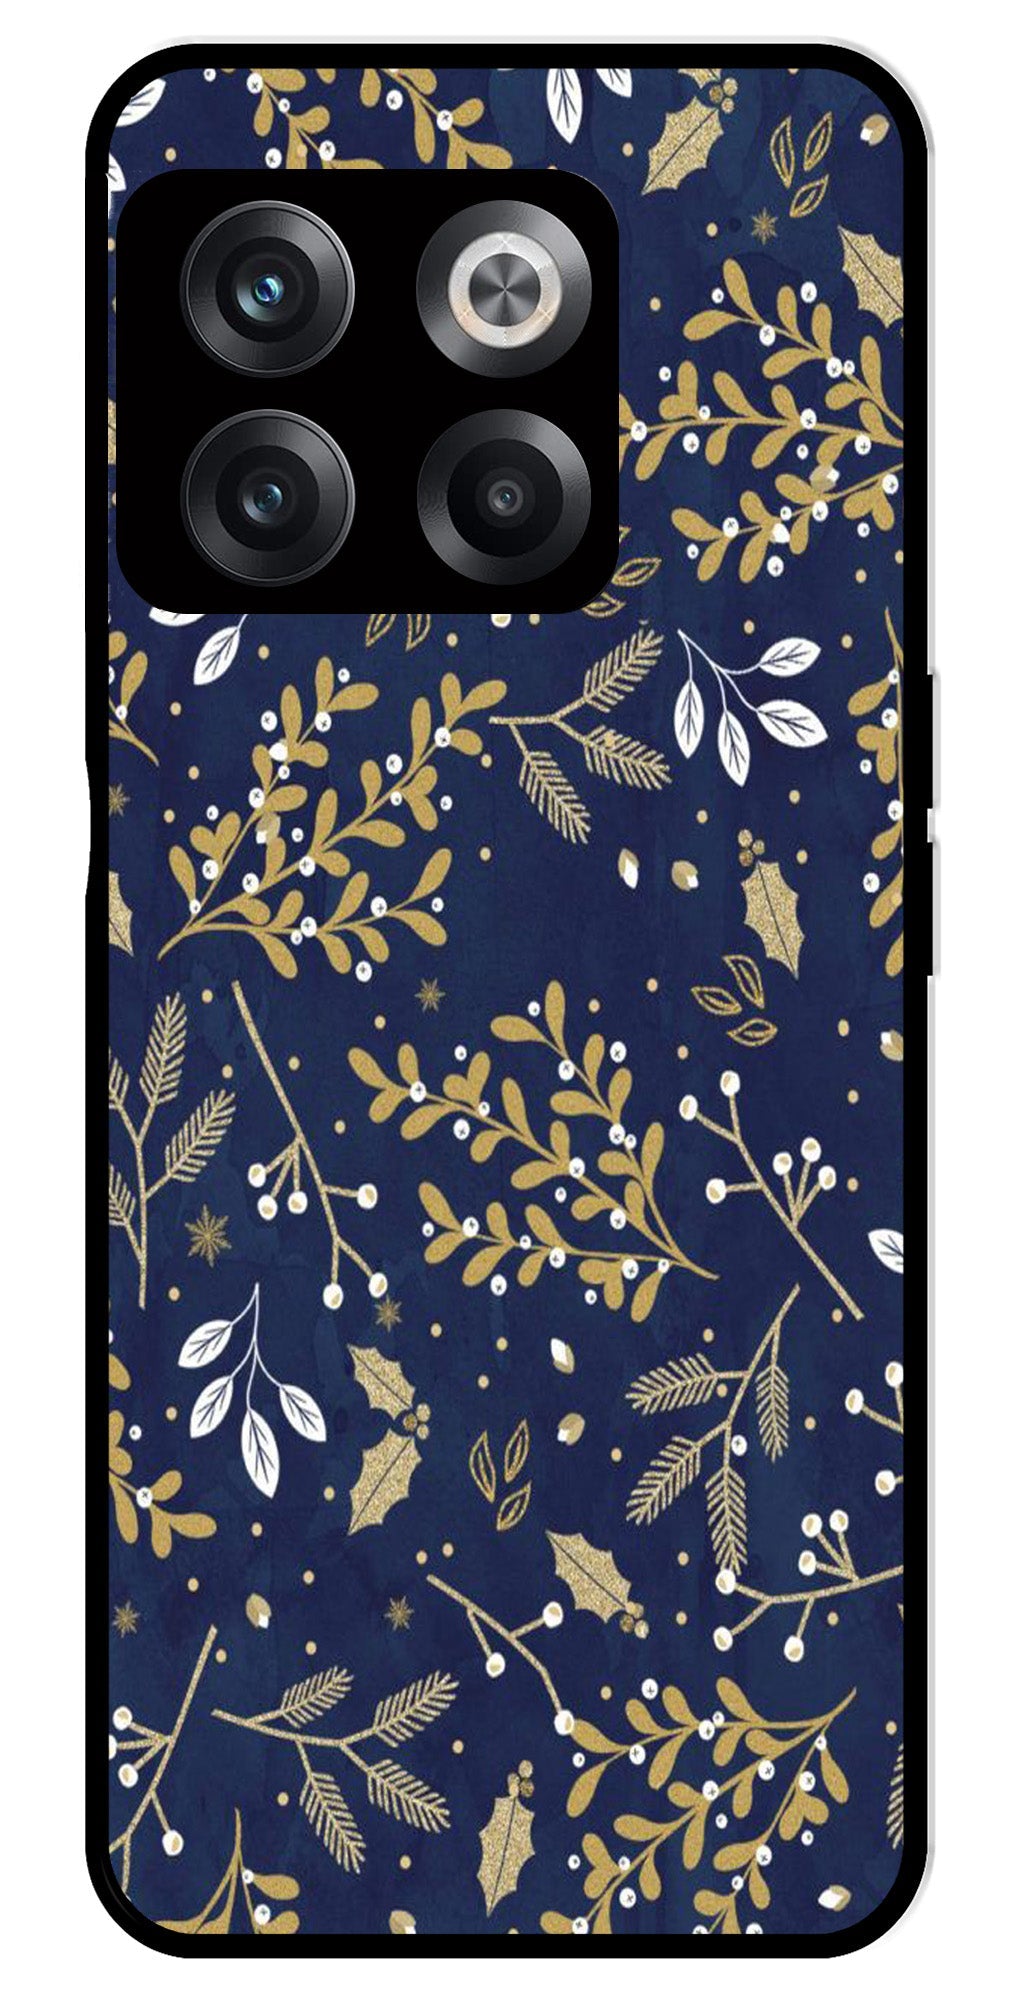 Floral Pattern  Metal Mobile Case for OnePlus 10T